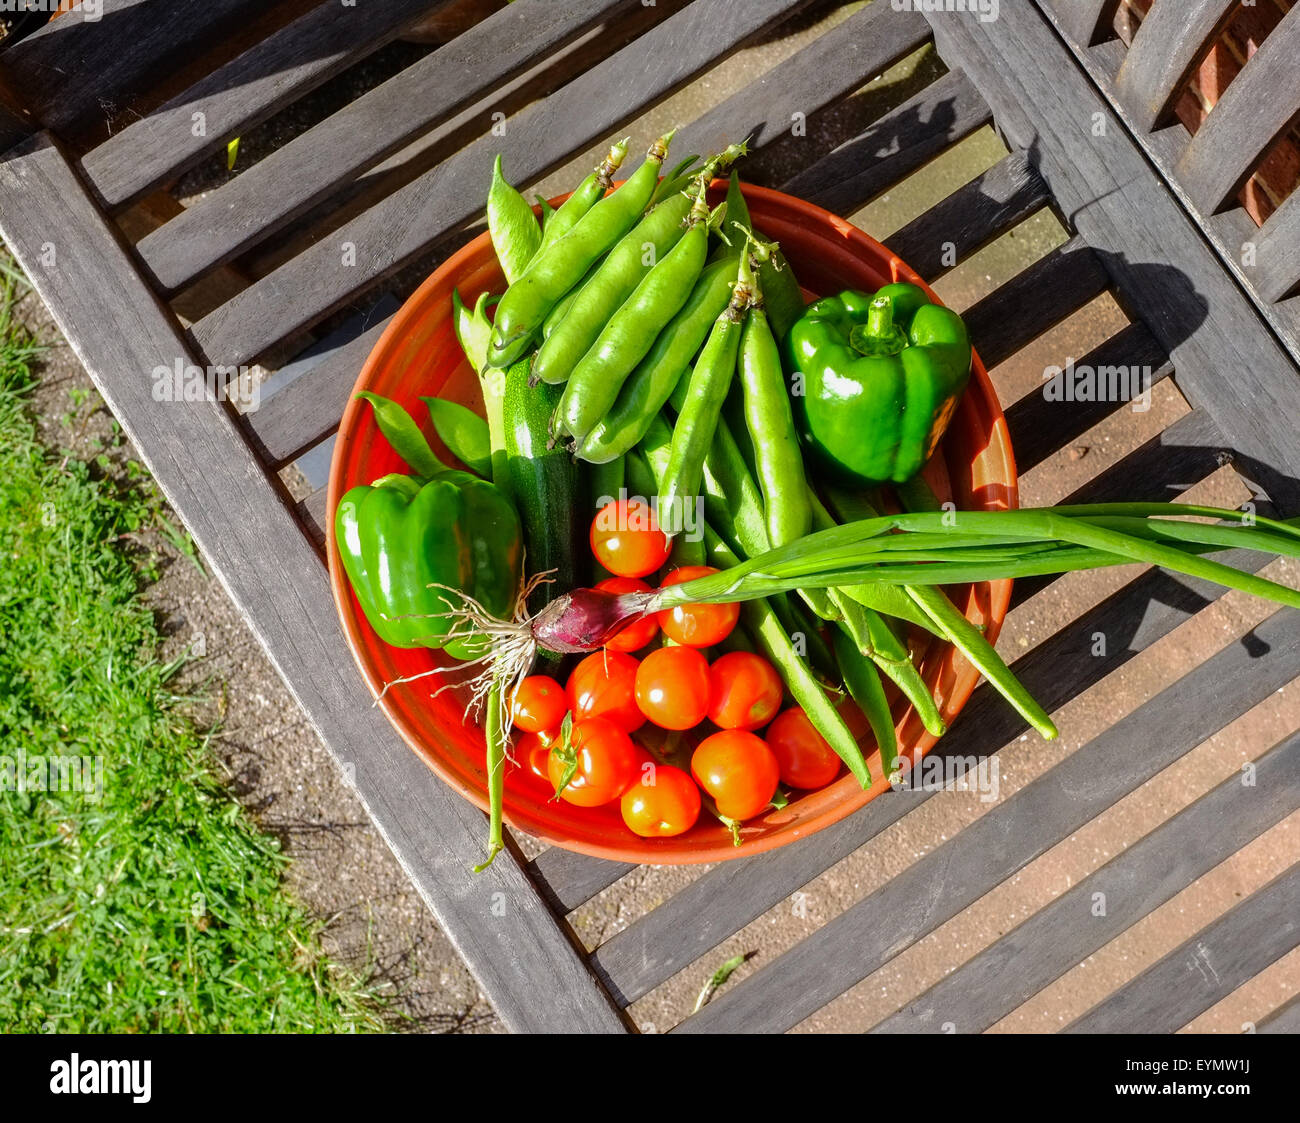 A bowl full of freshly picked fruit and vegetables on a garden seat. Stock Photo